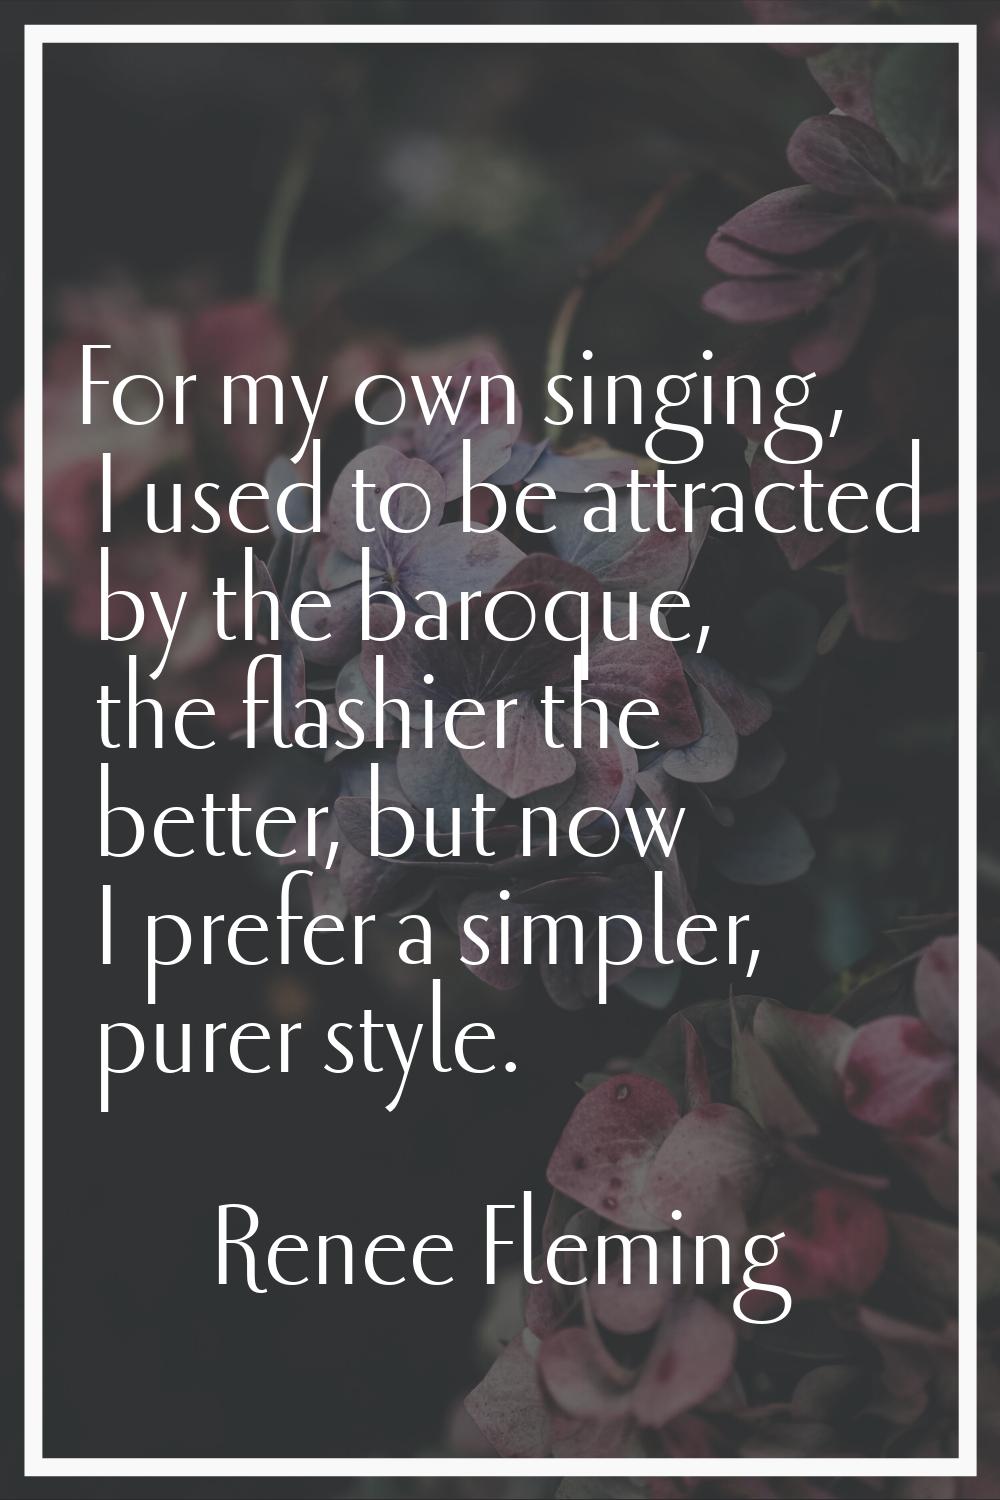 For my own singing, I used to be attracted by the baroque, the flashier the better, but now I prefe